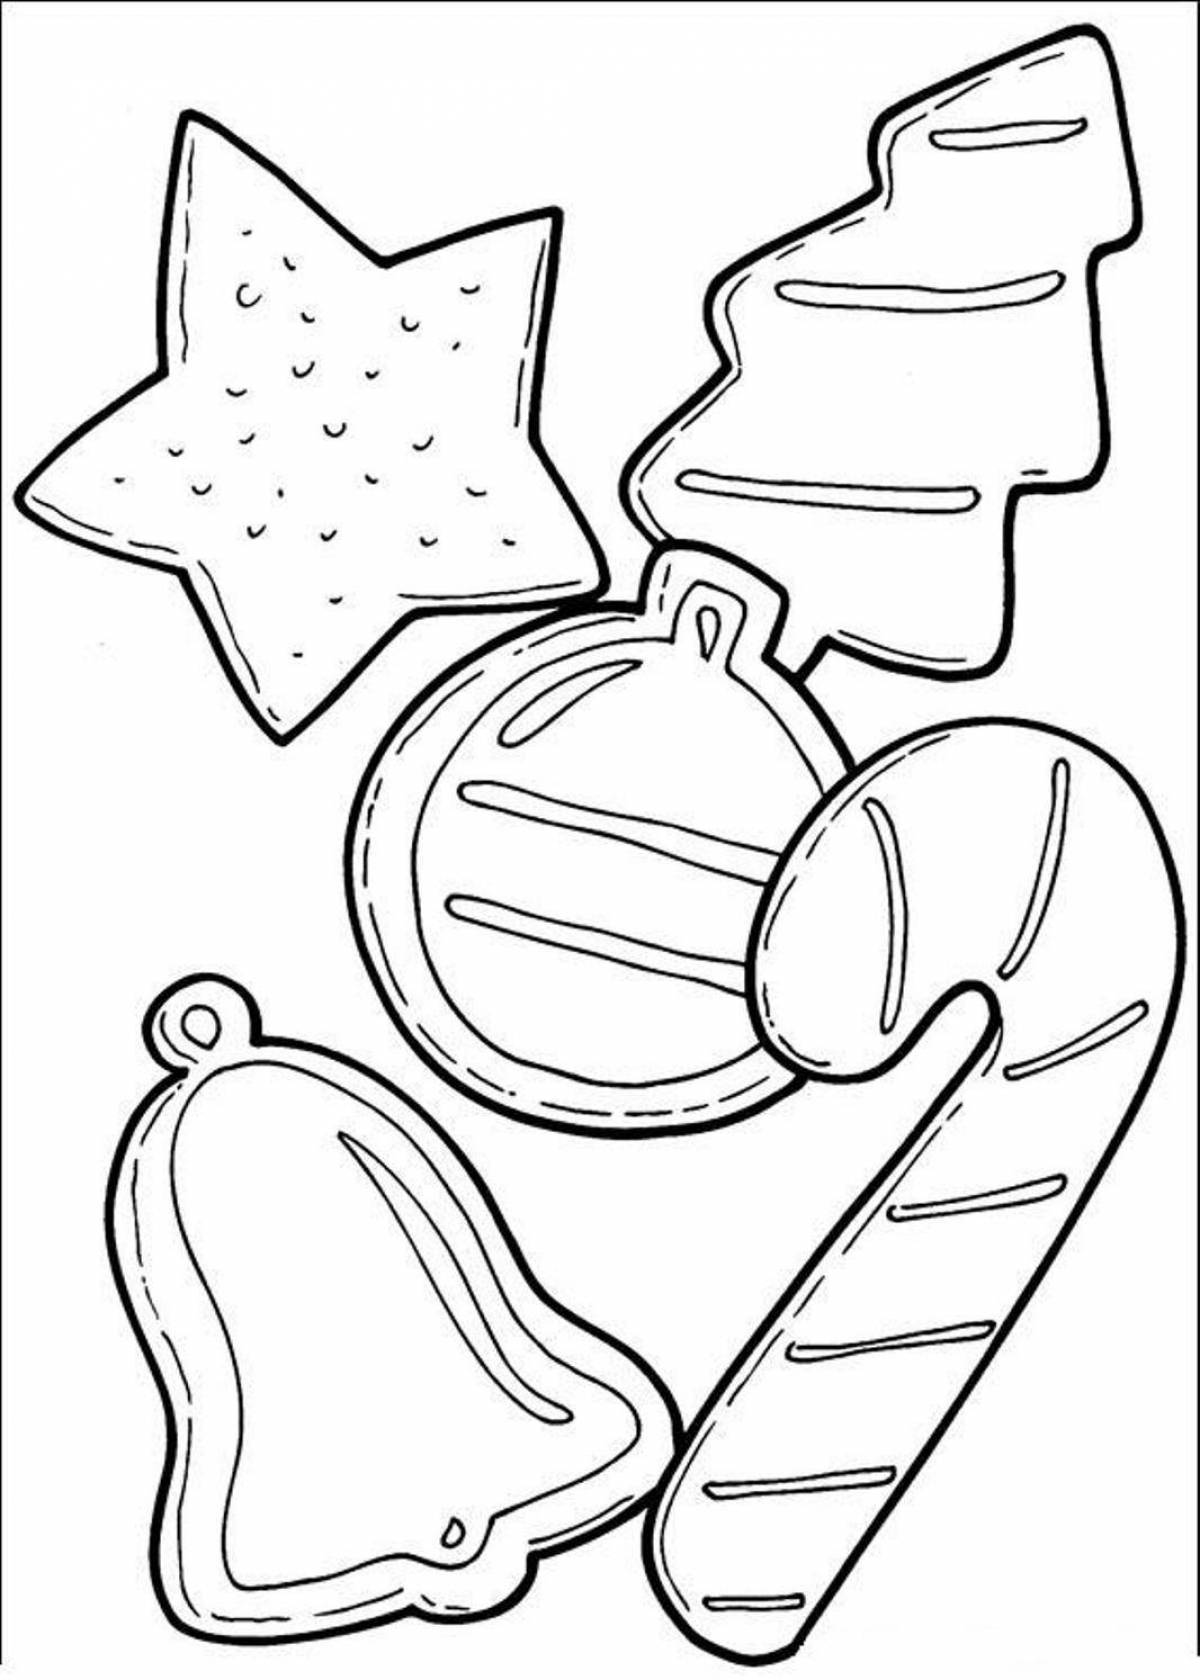 Coloring page decorated Christmas cookies